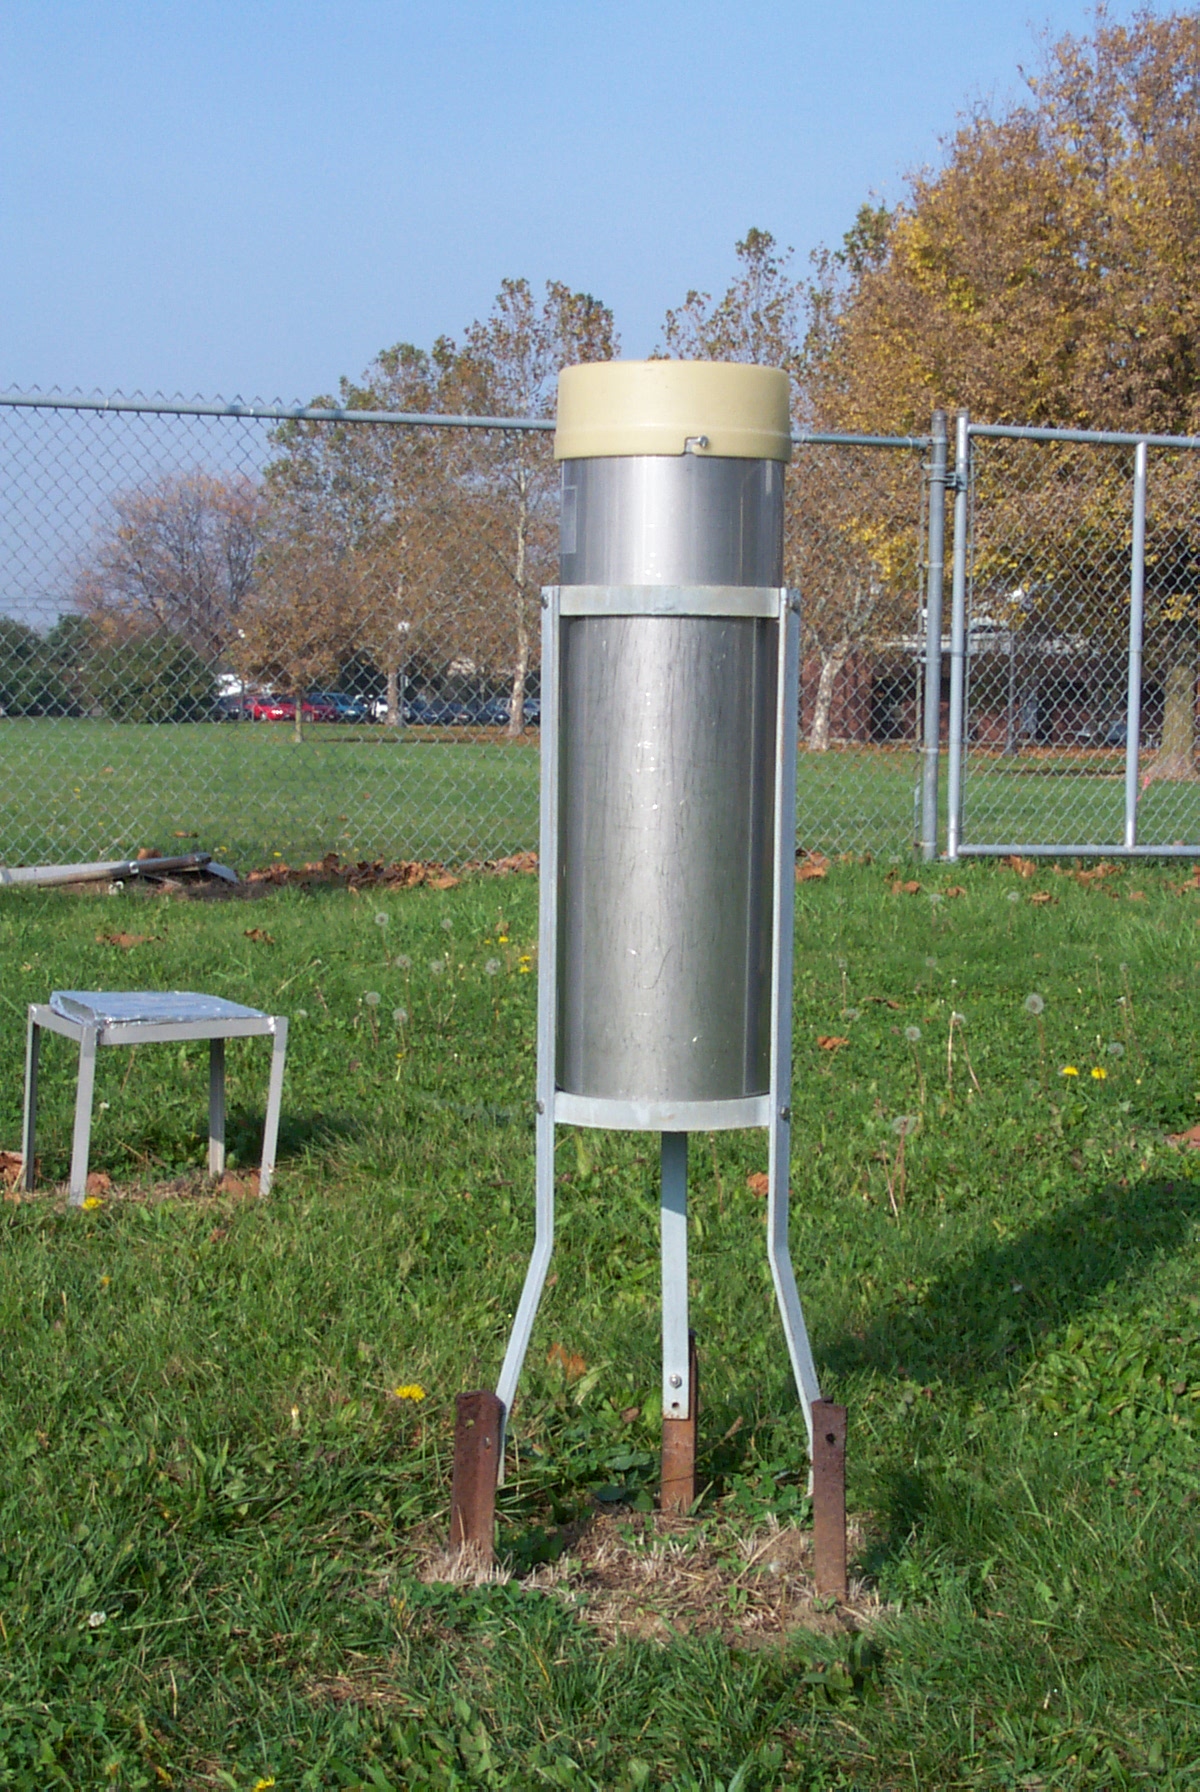 Standard Rain Gauge (SRG) by the National Weather Service